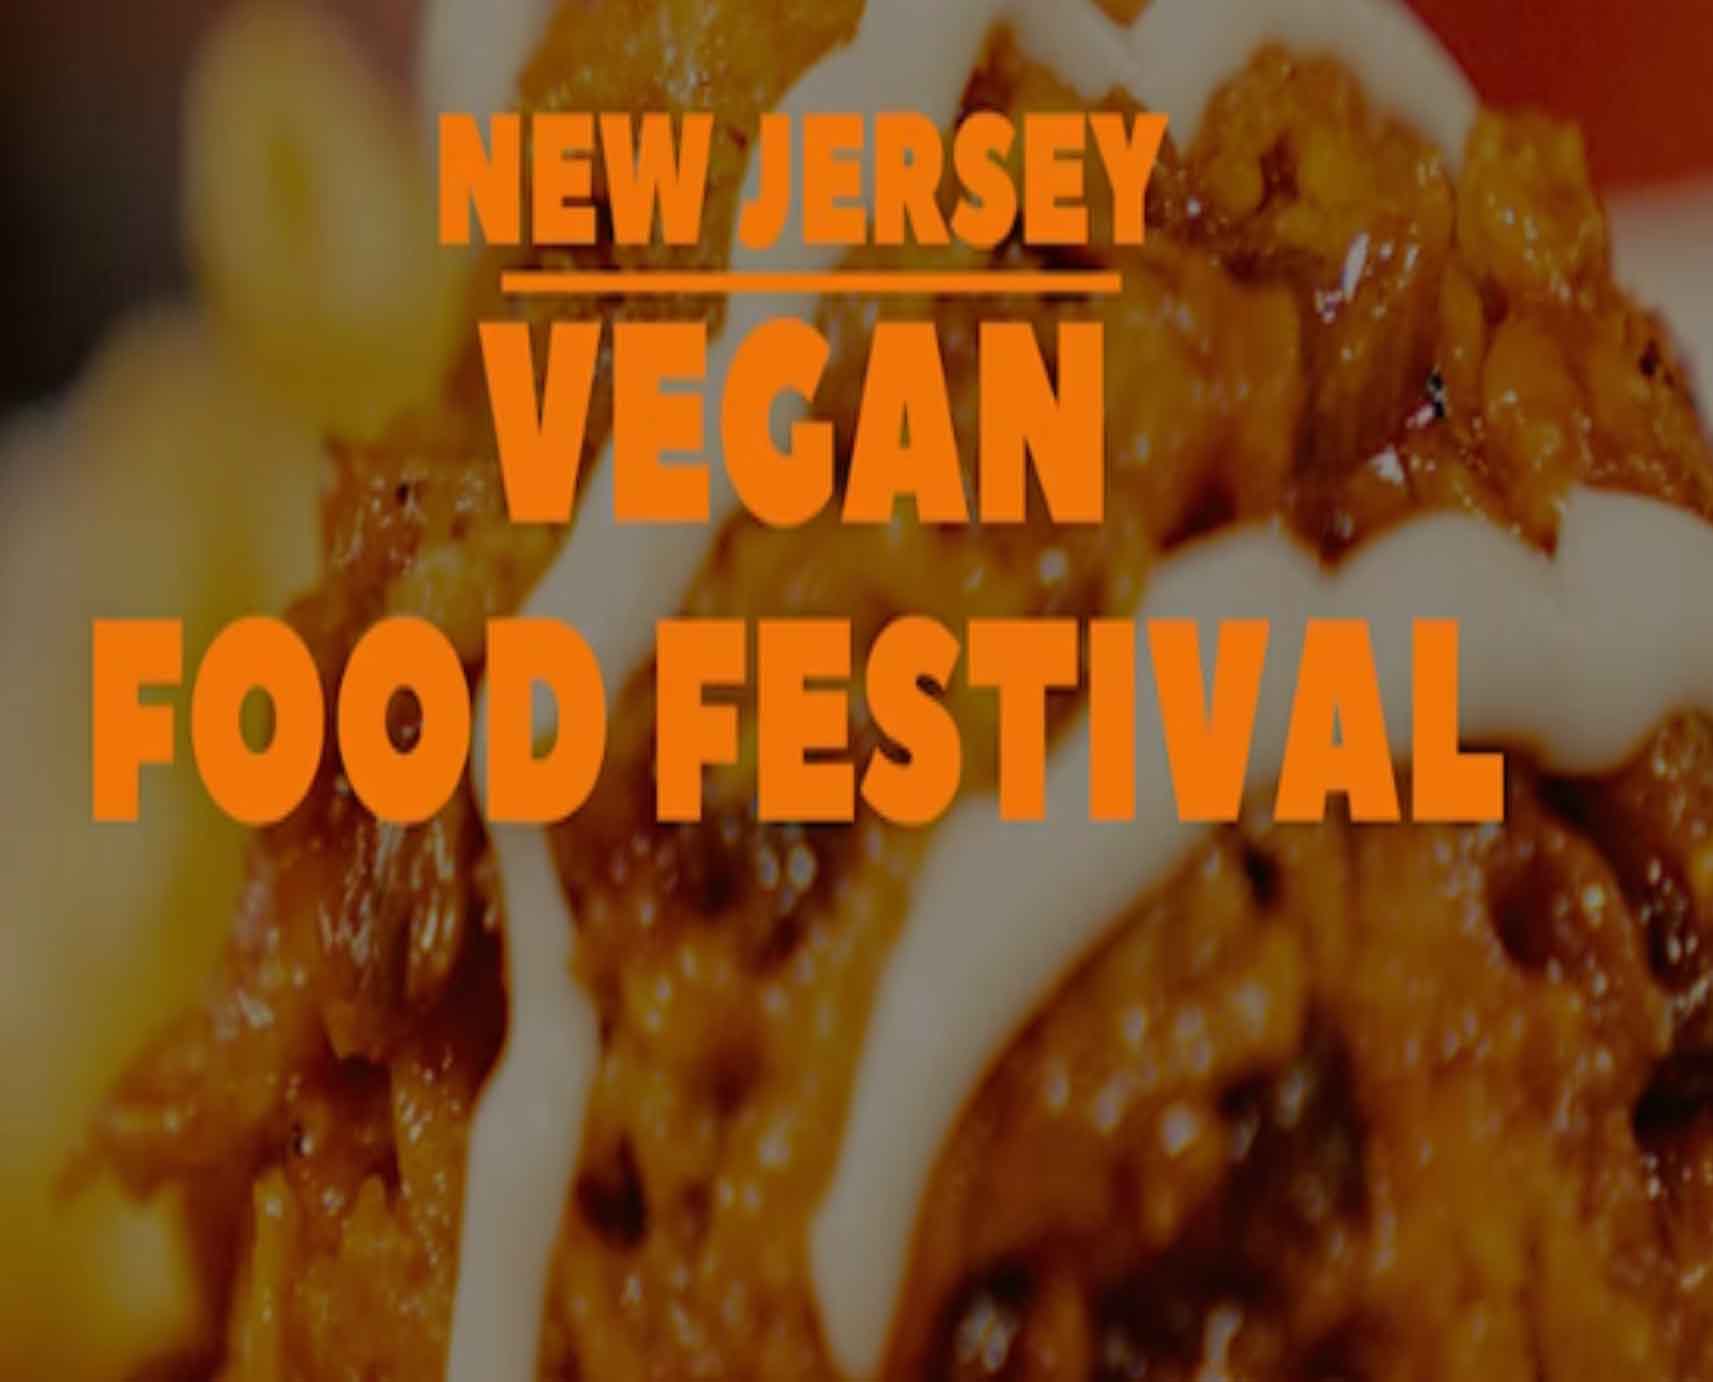 New Jersey Vegan Food Festival presented by the Vegan Local